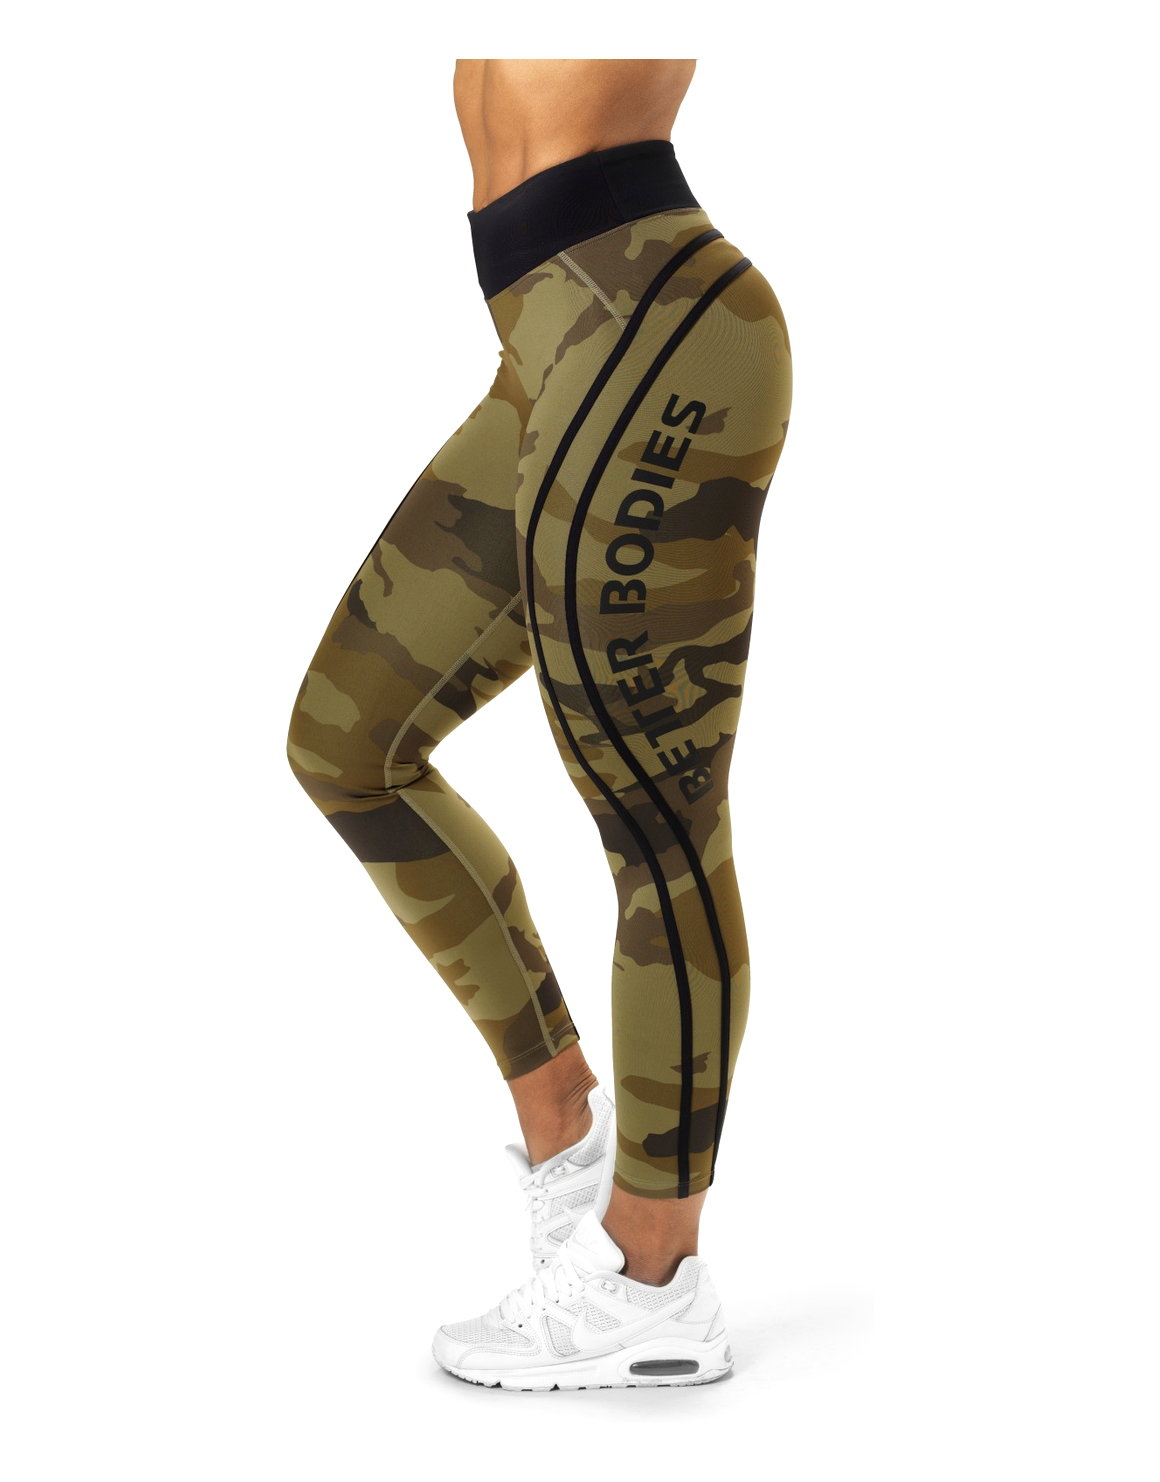 Camo High Tights by Better bodies, Colour: Green Camo - iafstore